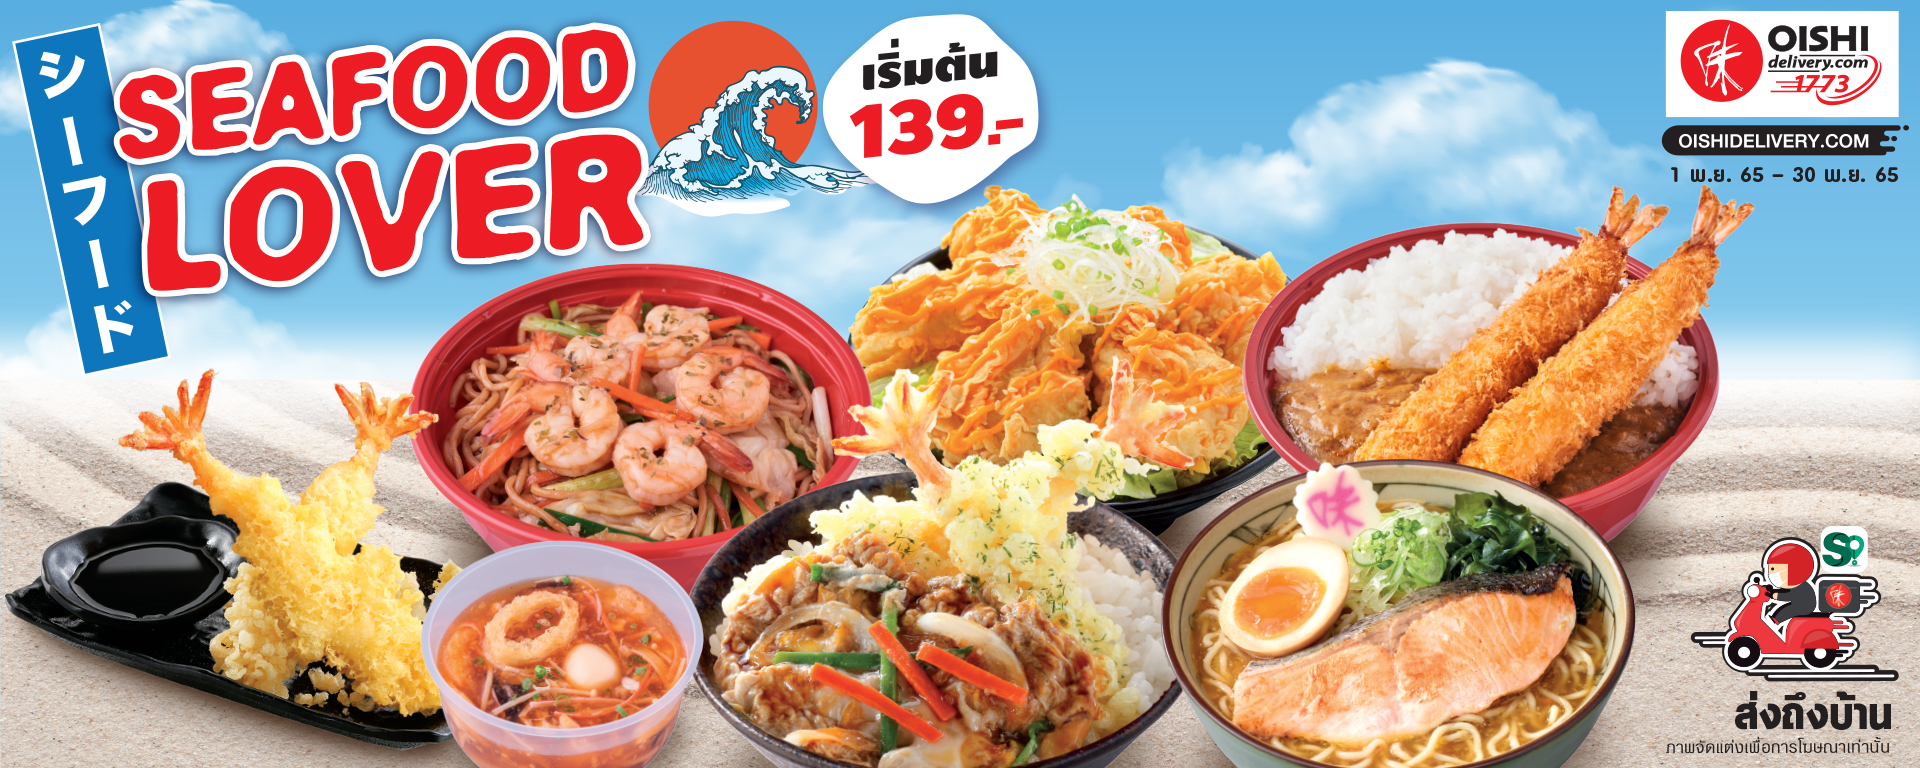 Oishi Delivery - Seafood Lover